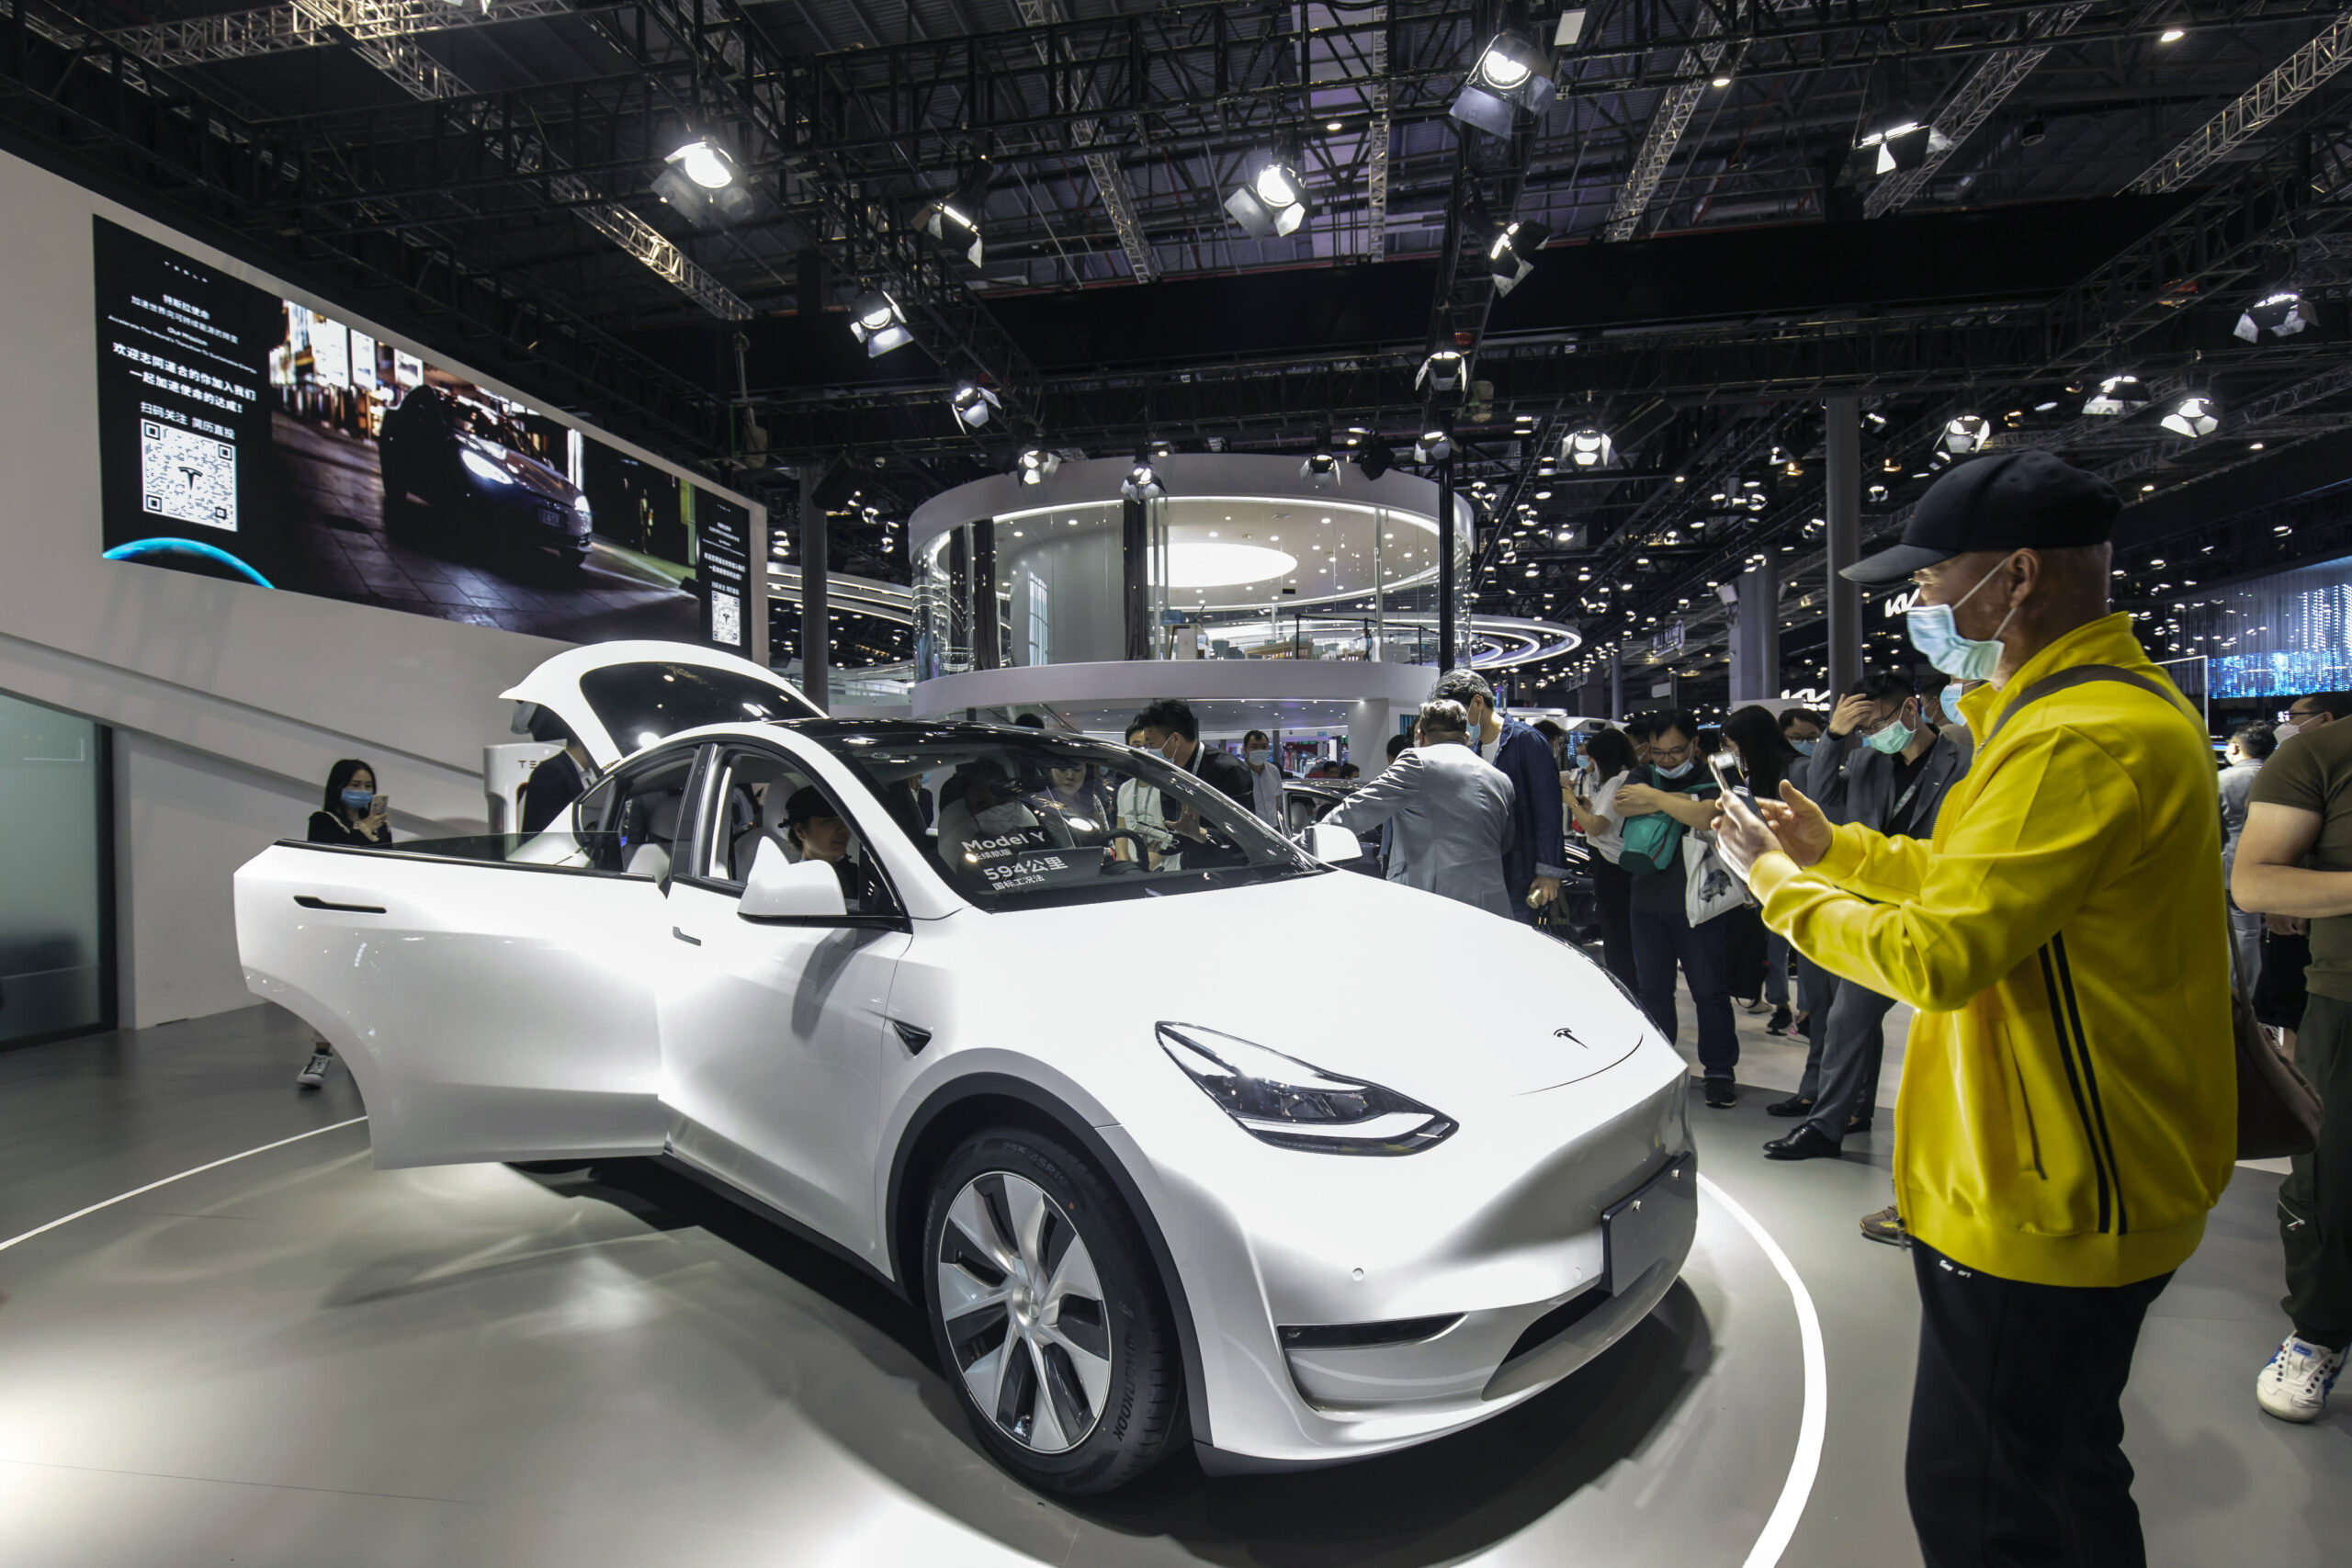 Consolidation in China’s electric vehicle space is ‘inevitable’